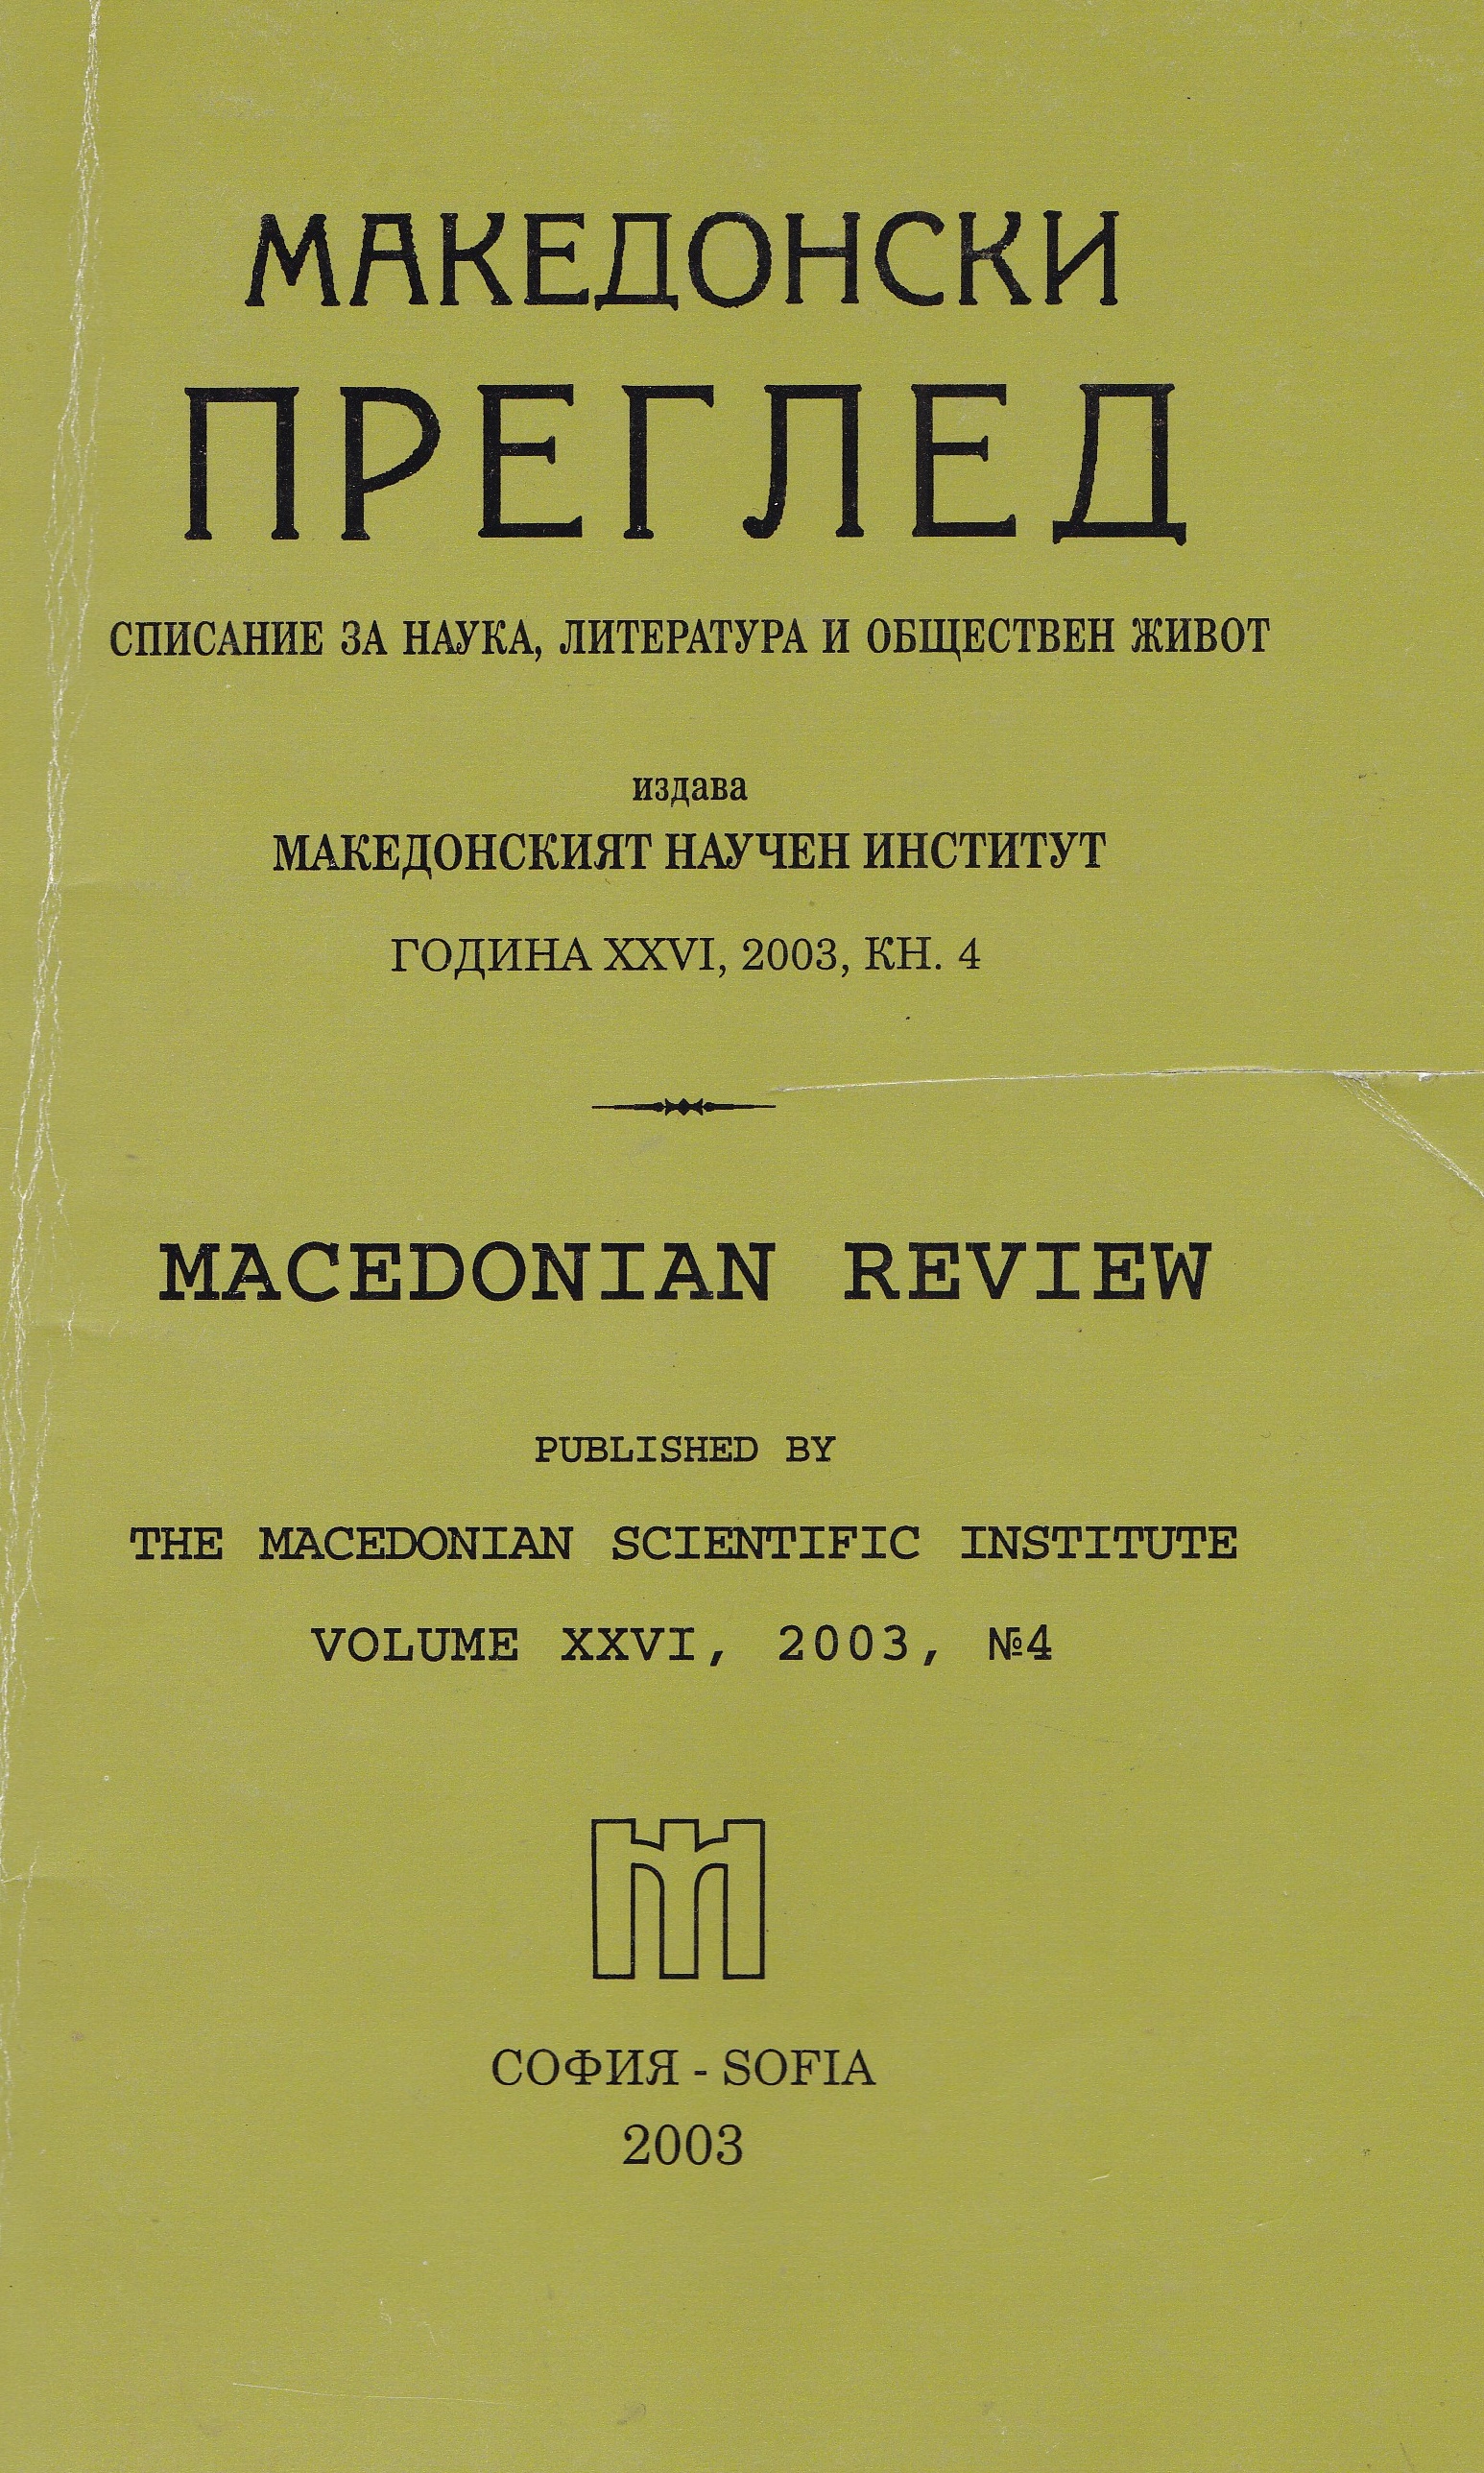 Report of Prof. Dr.H. Dimitar Gotsev, Chair of the Macedonian Scientific Institute - Sofia Cover Image